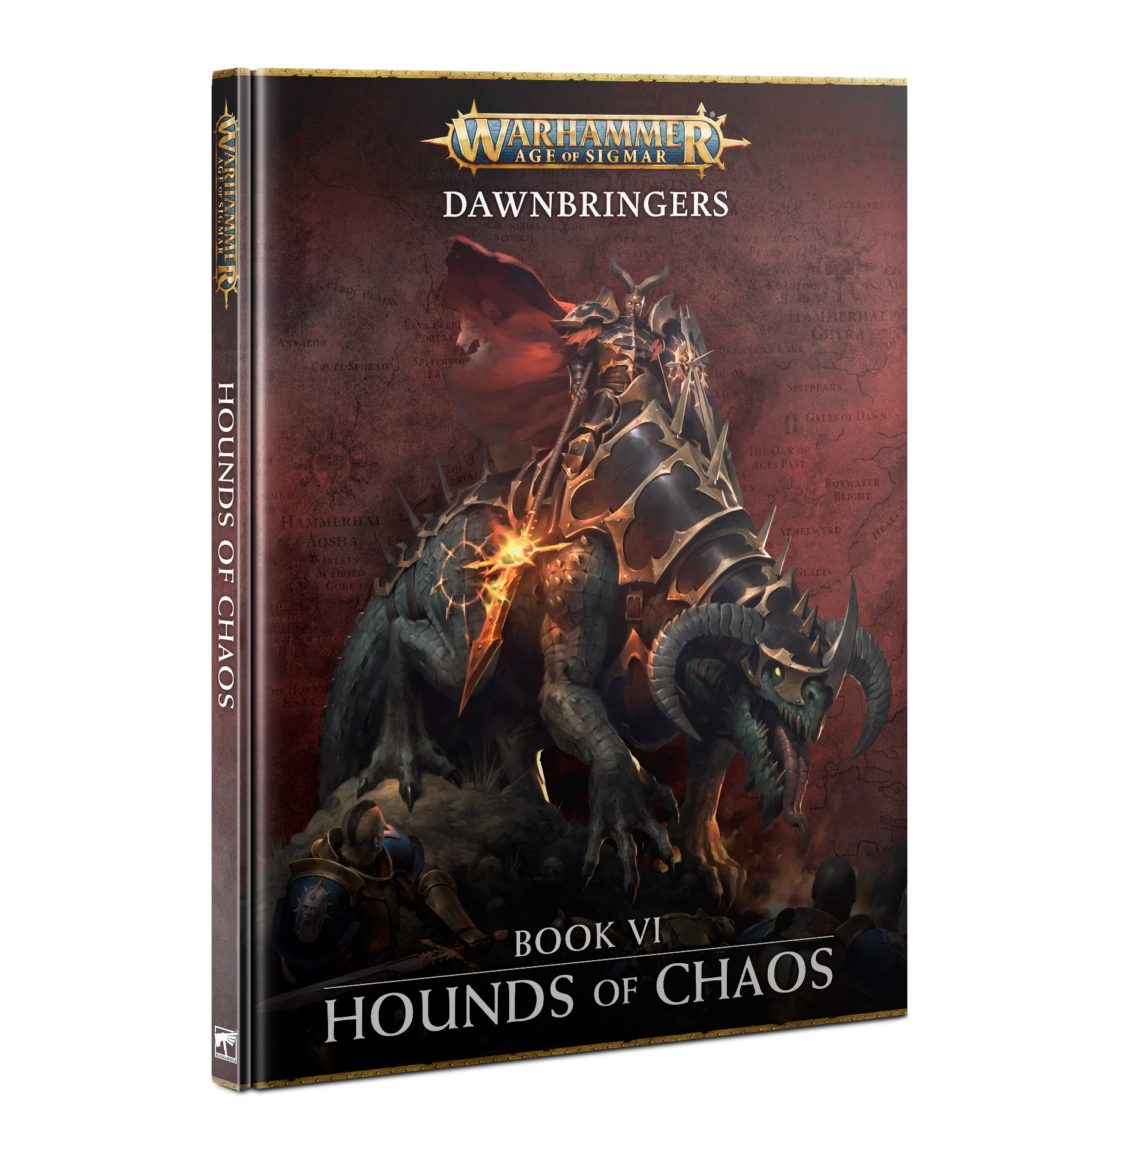 Age of Sigmar: Dawnbringers - Hounds of Chaos (English)